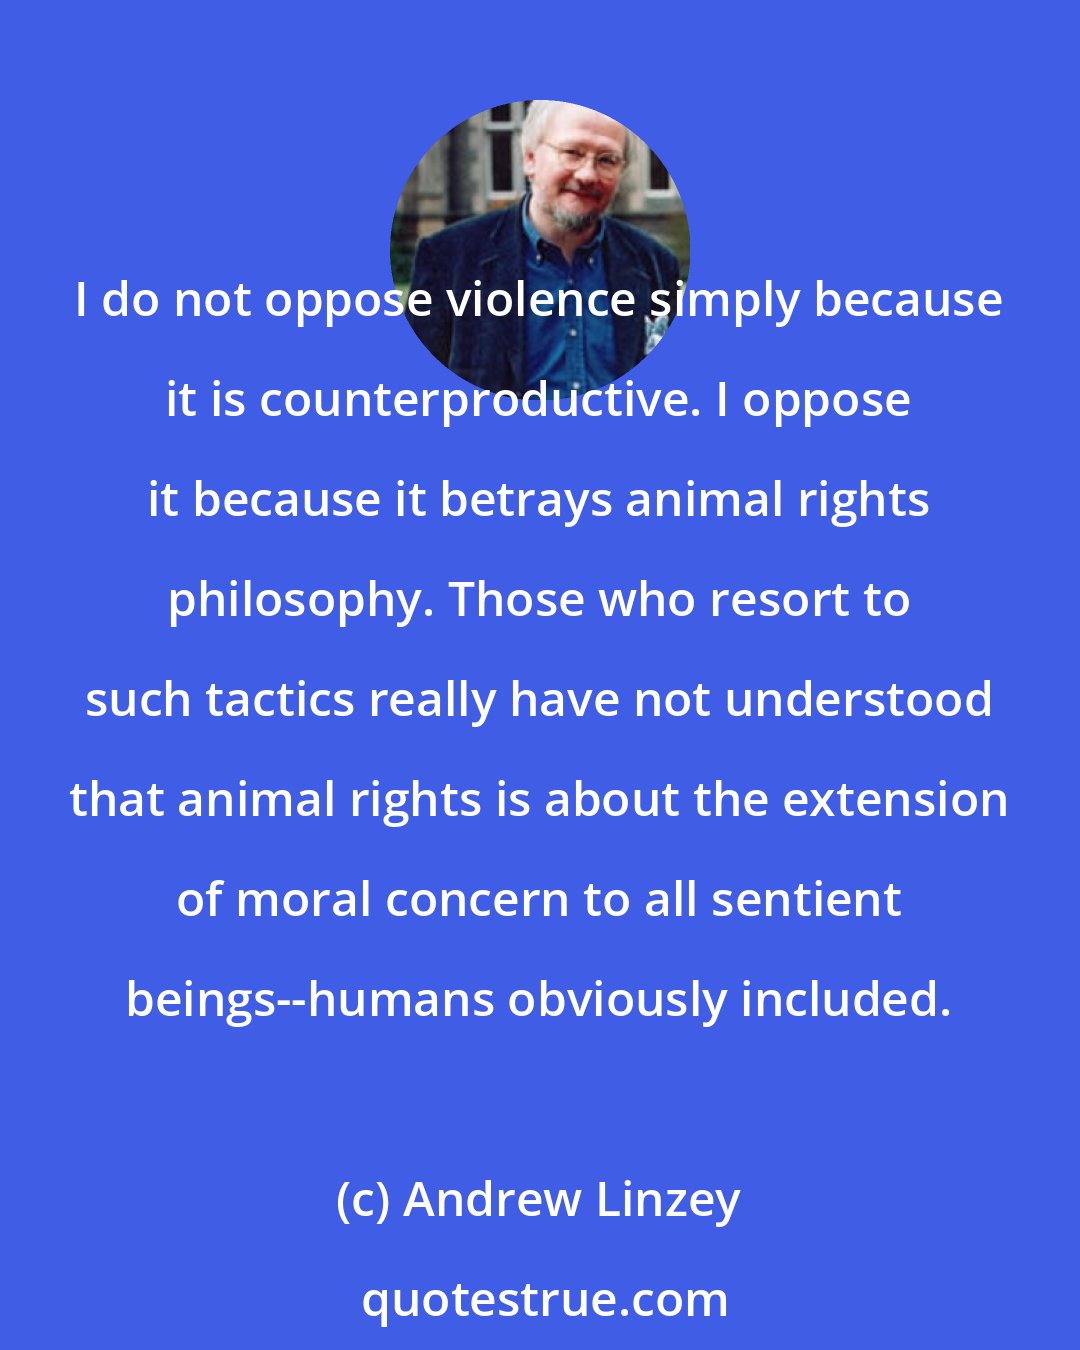 Andrew Linzey: I do not oppose violence simply because it is counterproductive. I oppose it because it betrays animal rights philosophy. Those who resort to such tactics really have not understood that animal rights is about the extension of moral concern to all sentient beings--humans obviously included.